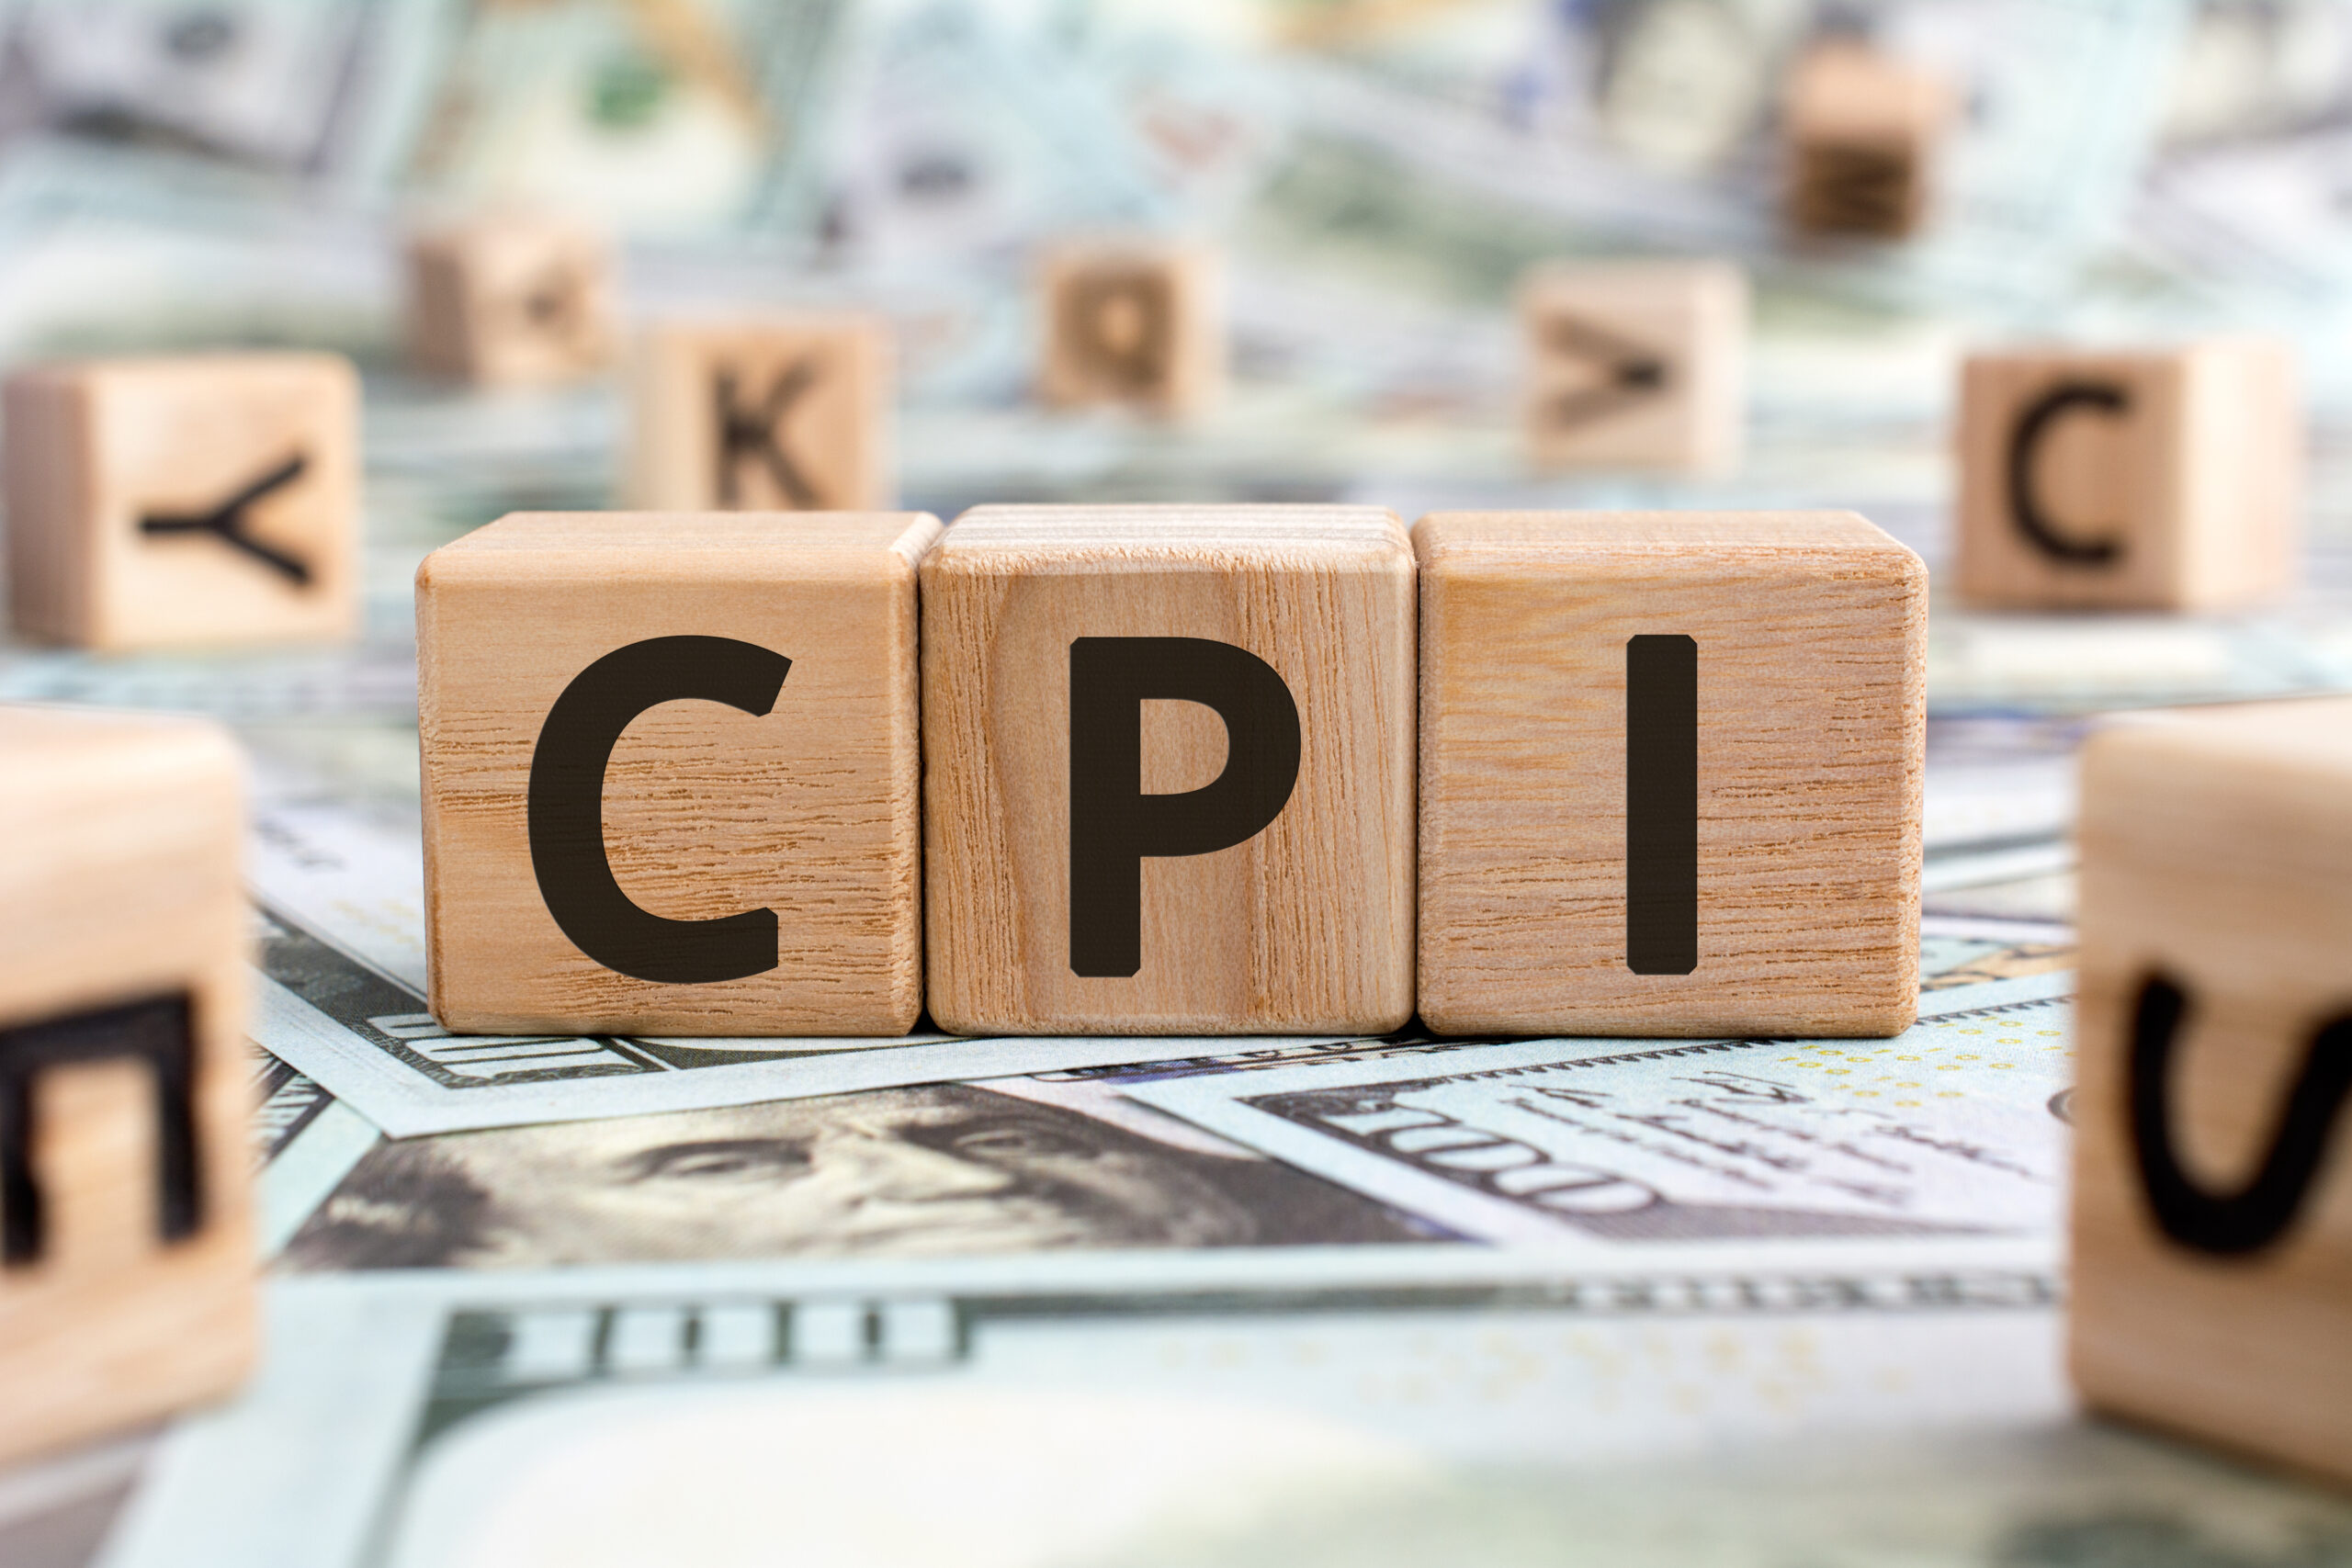 CPI - acronym from wooden blocks with letters, abbreviation CPI Consumer price index concept, random letters around, money background, consumer price index